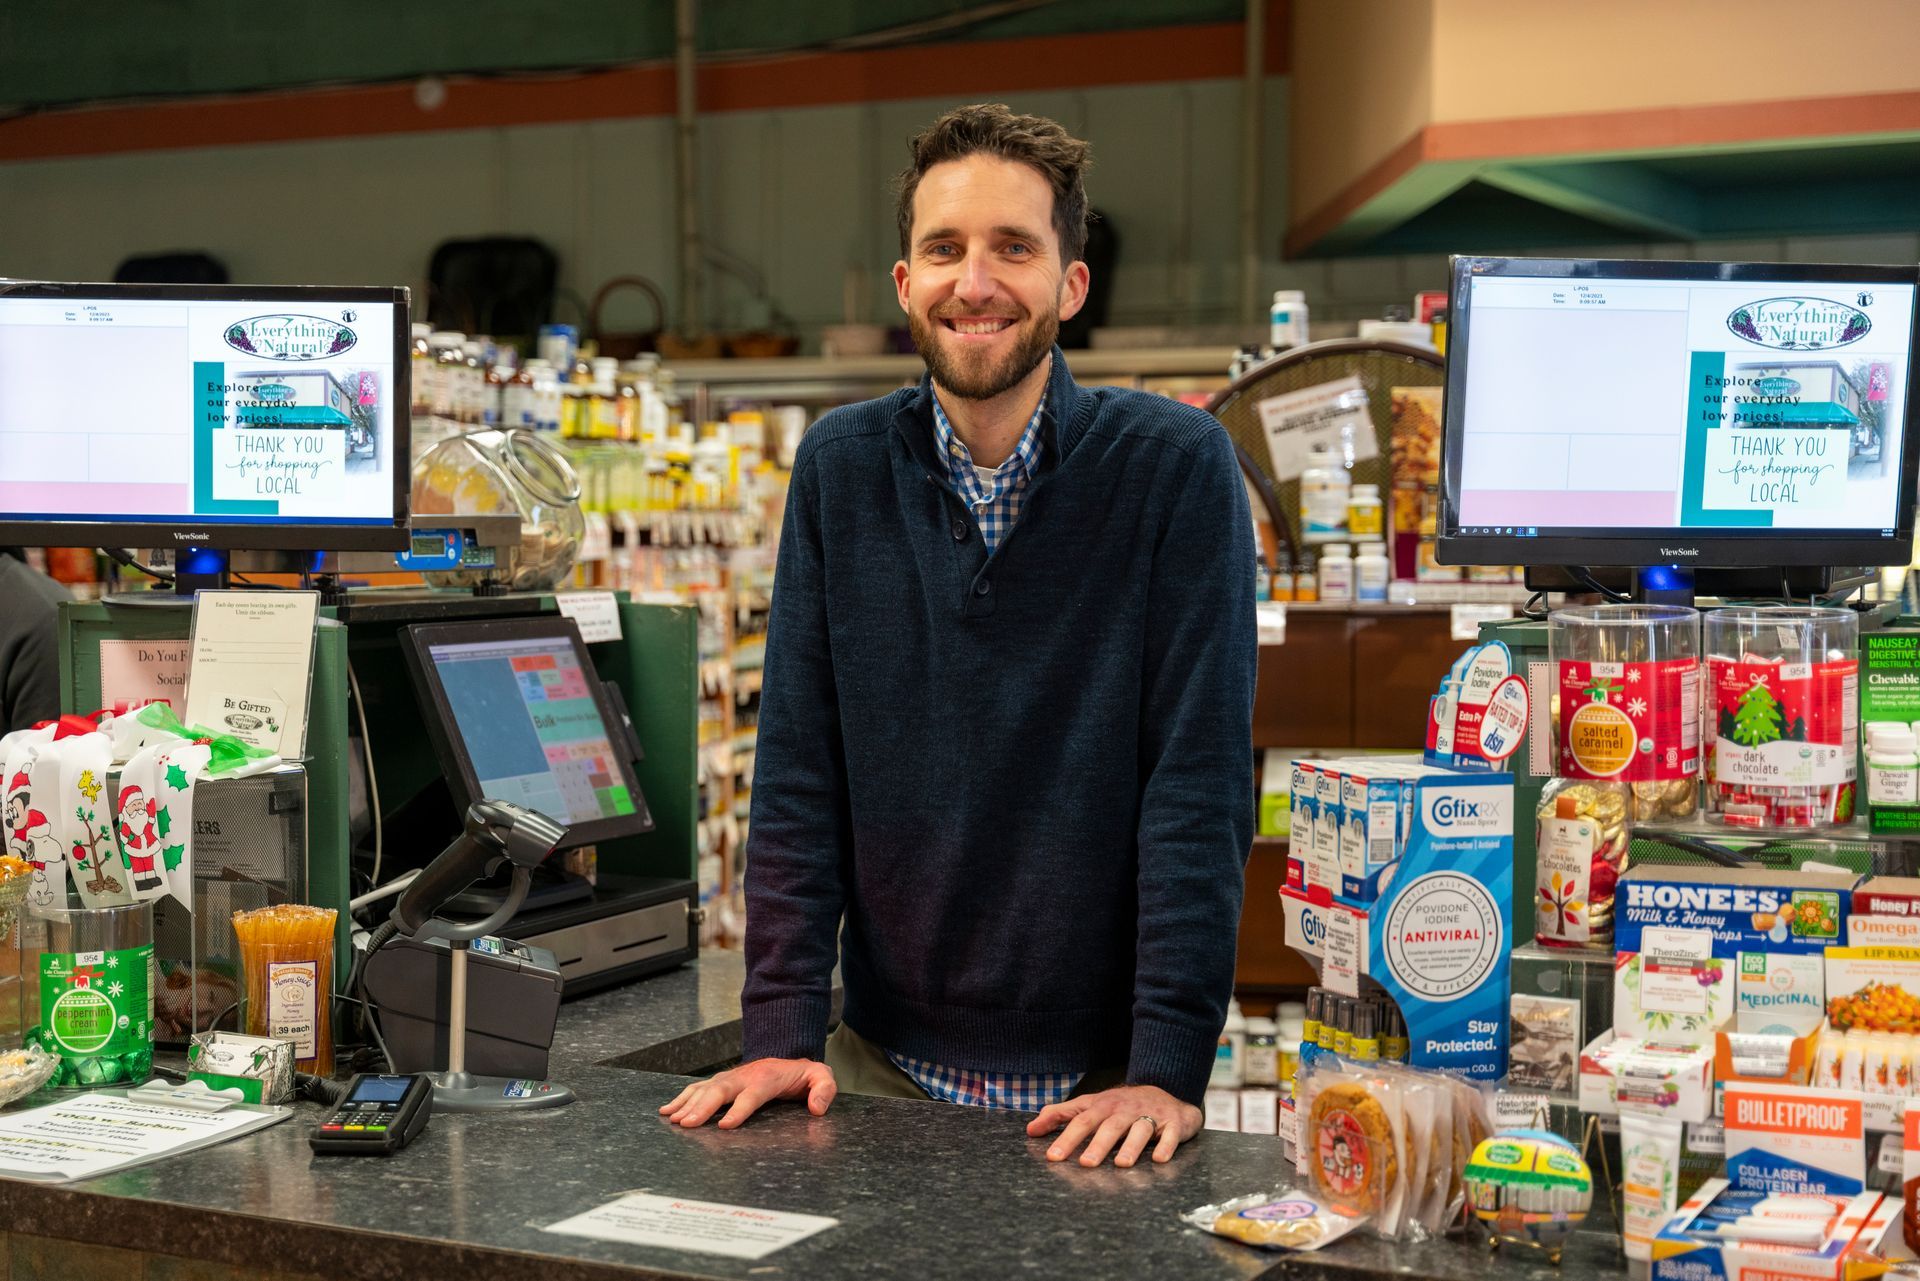 a man is standing behind a counter in a grocery store .